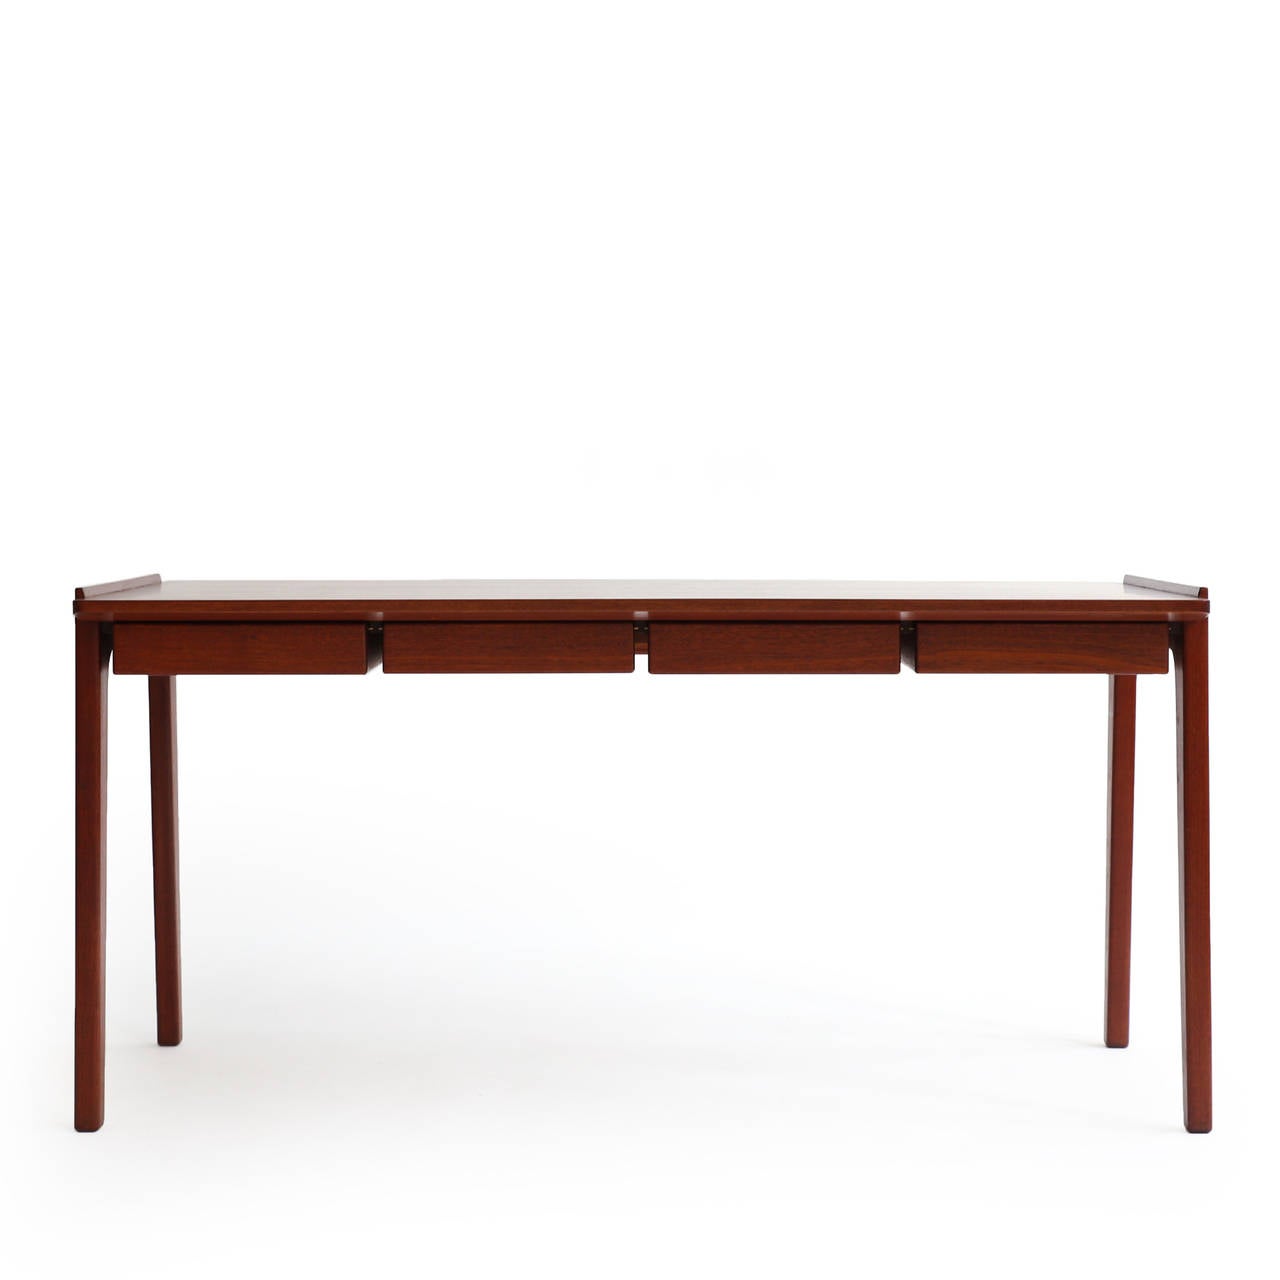 Freestanding teak desk designed by Tove & Edvard Kindt-Larsen, executed by cabinetmaker Torald Madsen. 

Mounted on tapering legs, four front drawers and top with raised edge. 

A beautiful and simple piece of very high quality.

Marked with